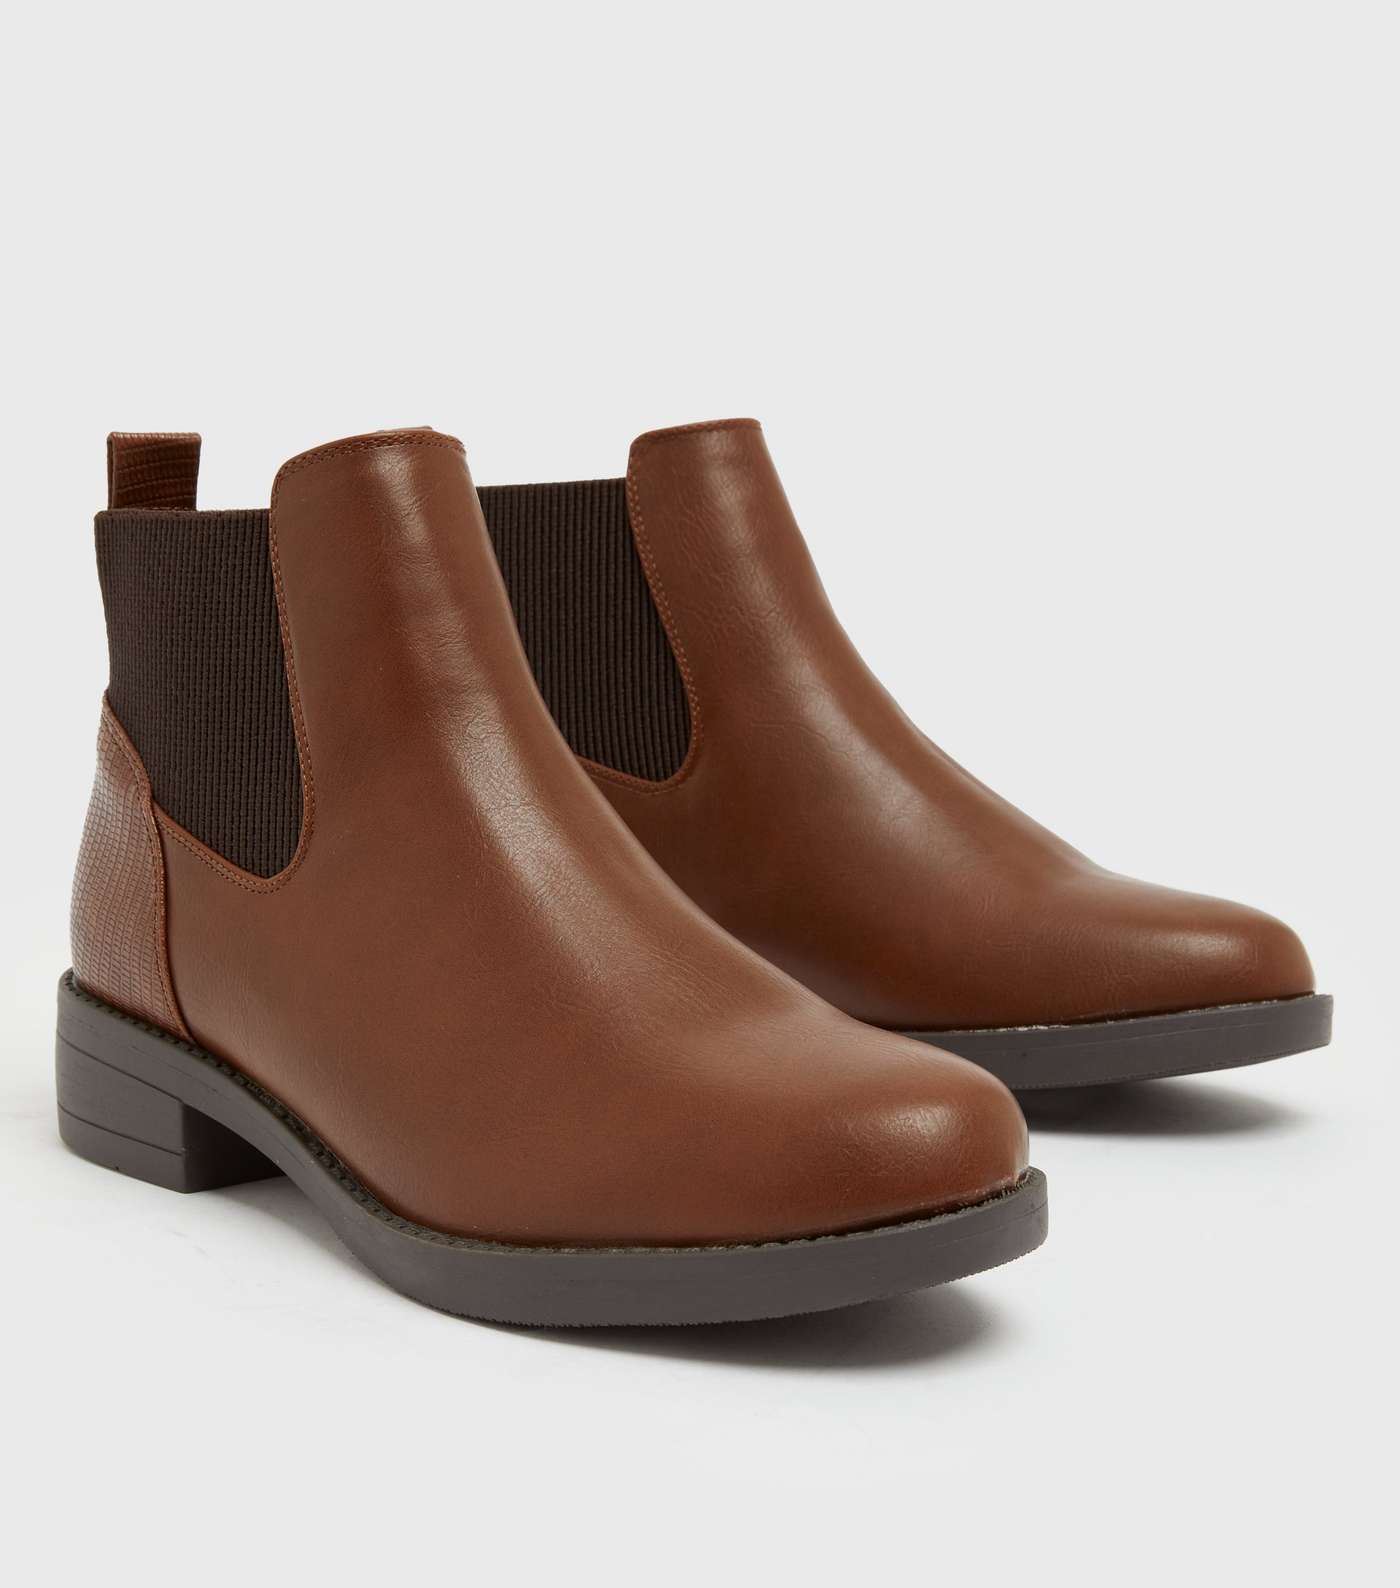 Girls Tan Round Toe Chelsea Boots Image 3